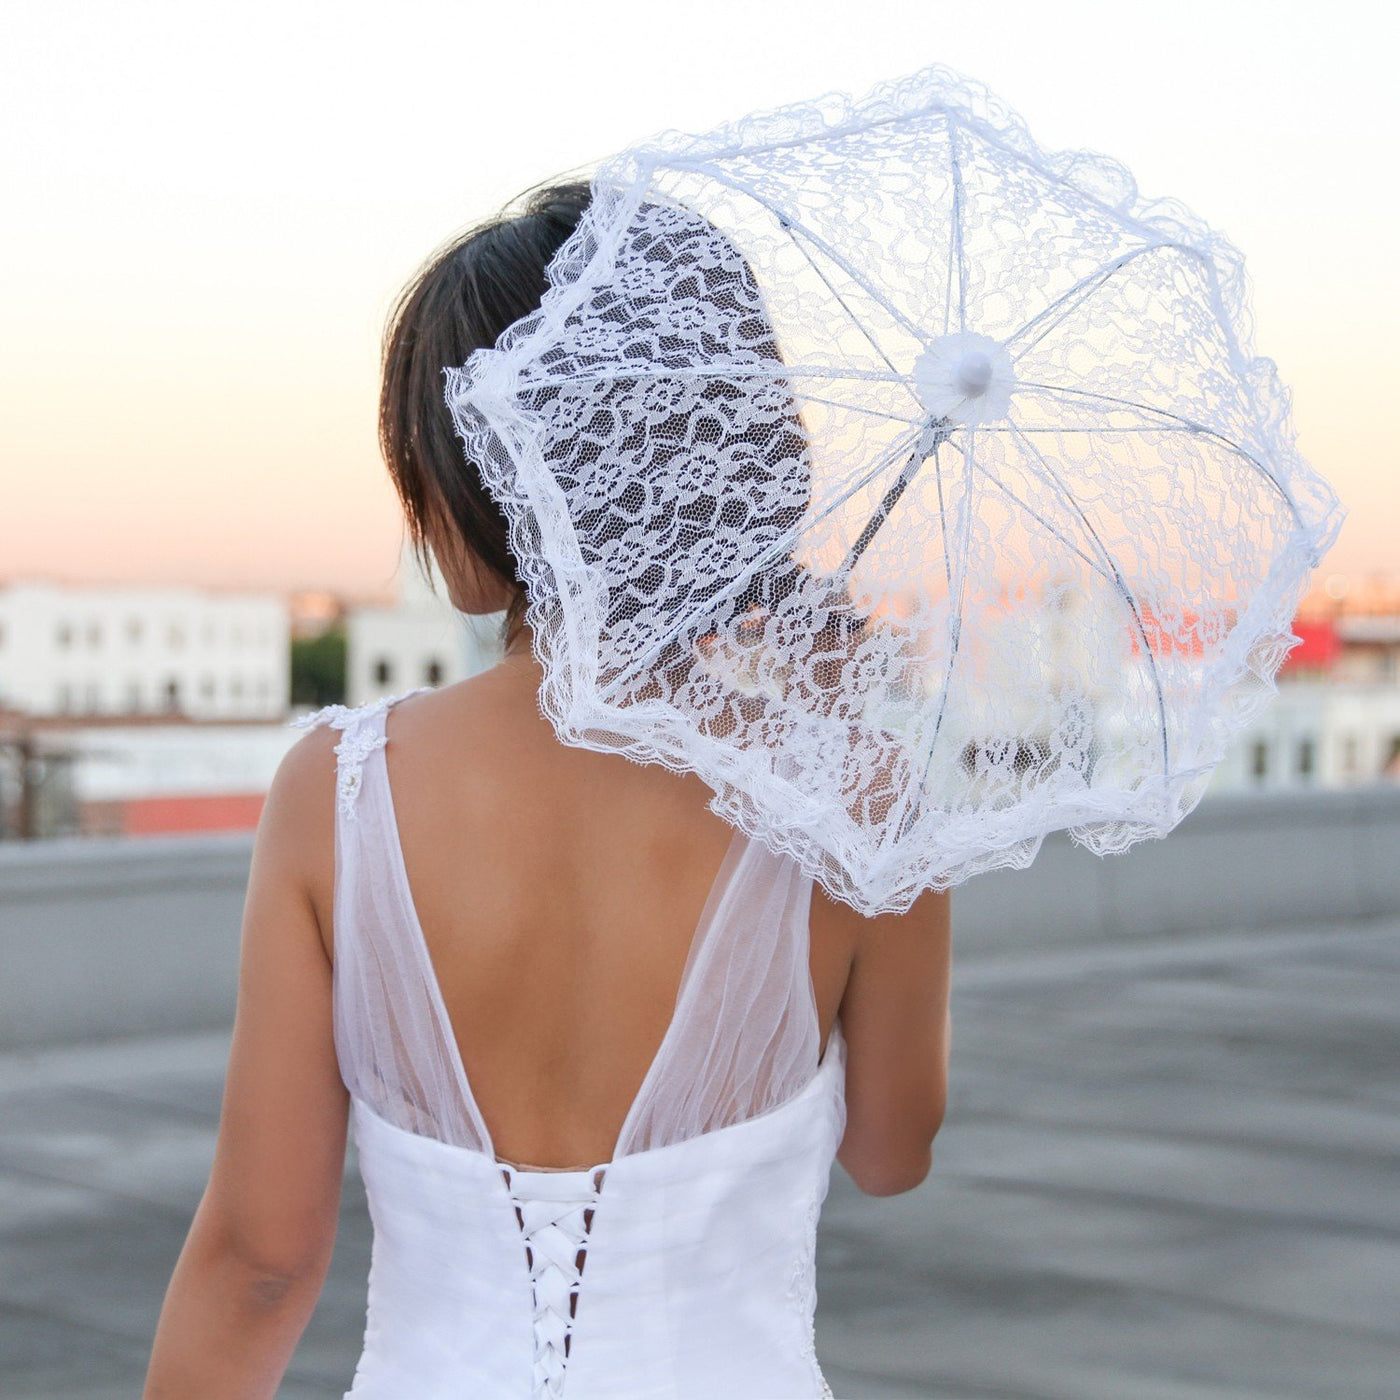 Vintage Inspired Mini Bridal Lace Parasol in White